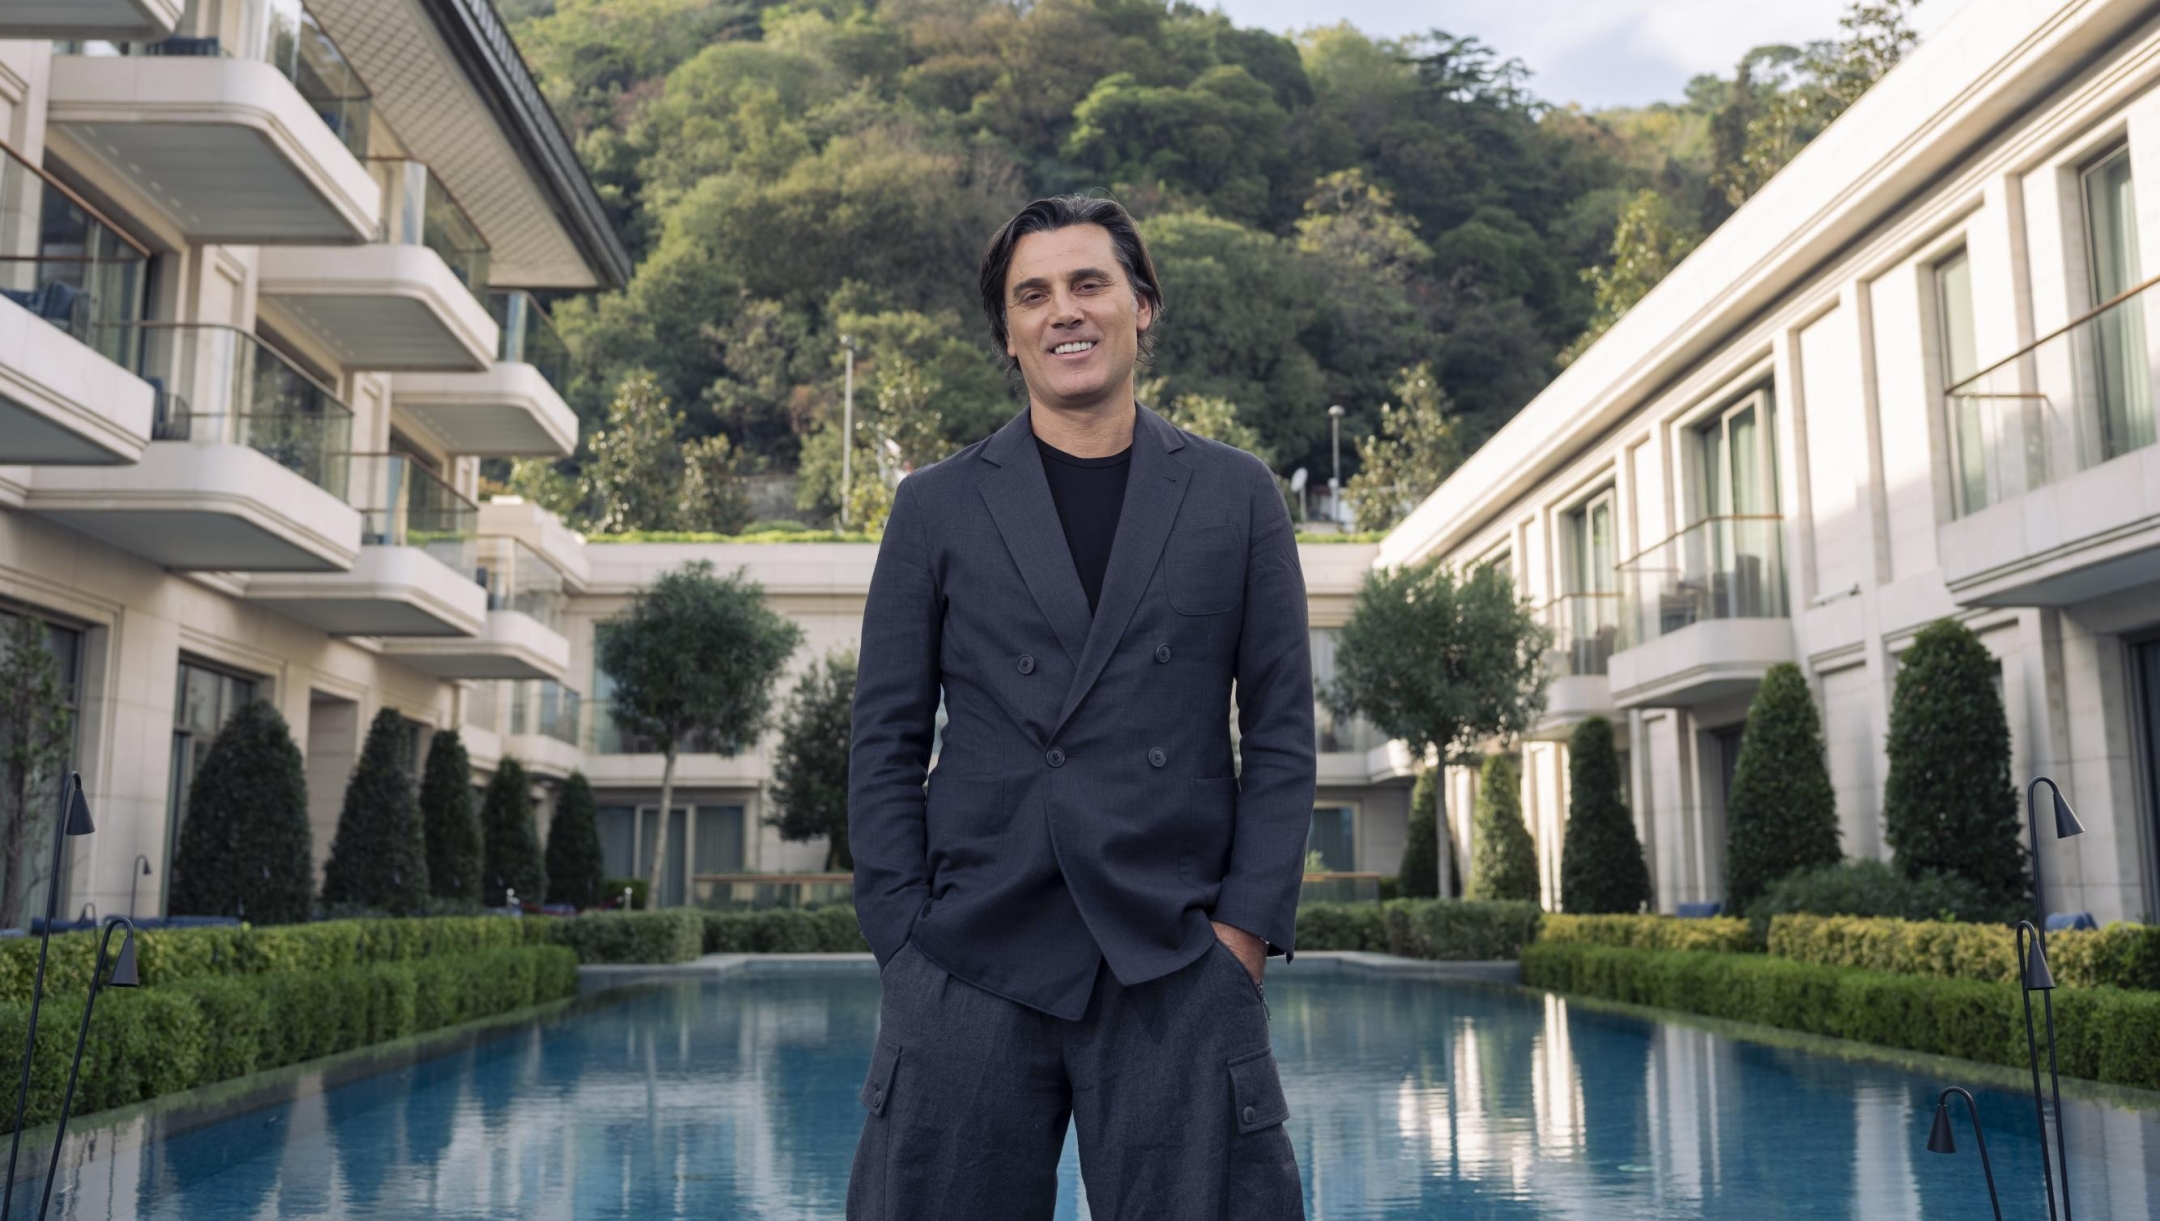 Vincenzo Montella, coach of the Turkish national football team, poses for a portrait at the Mandarin Oriental hotel in central Istanbul, where he is staying with his family whilst they are visiting.